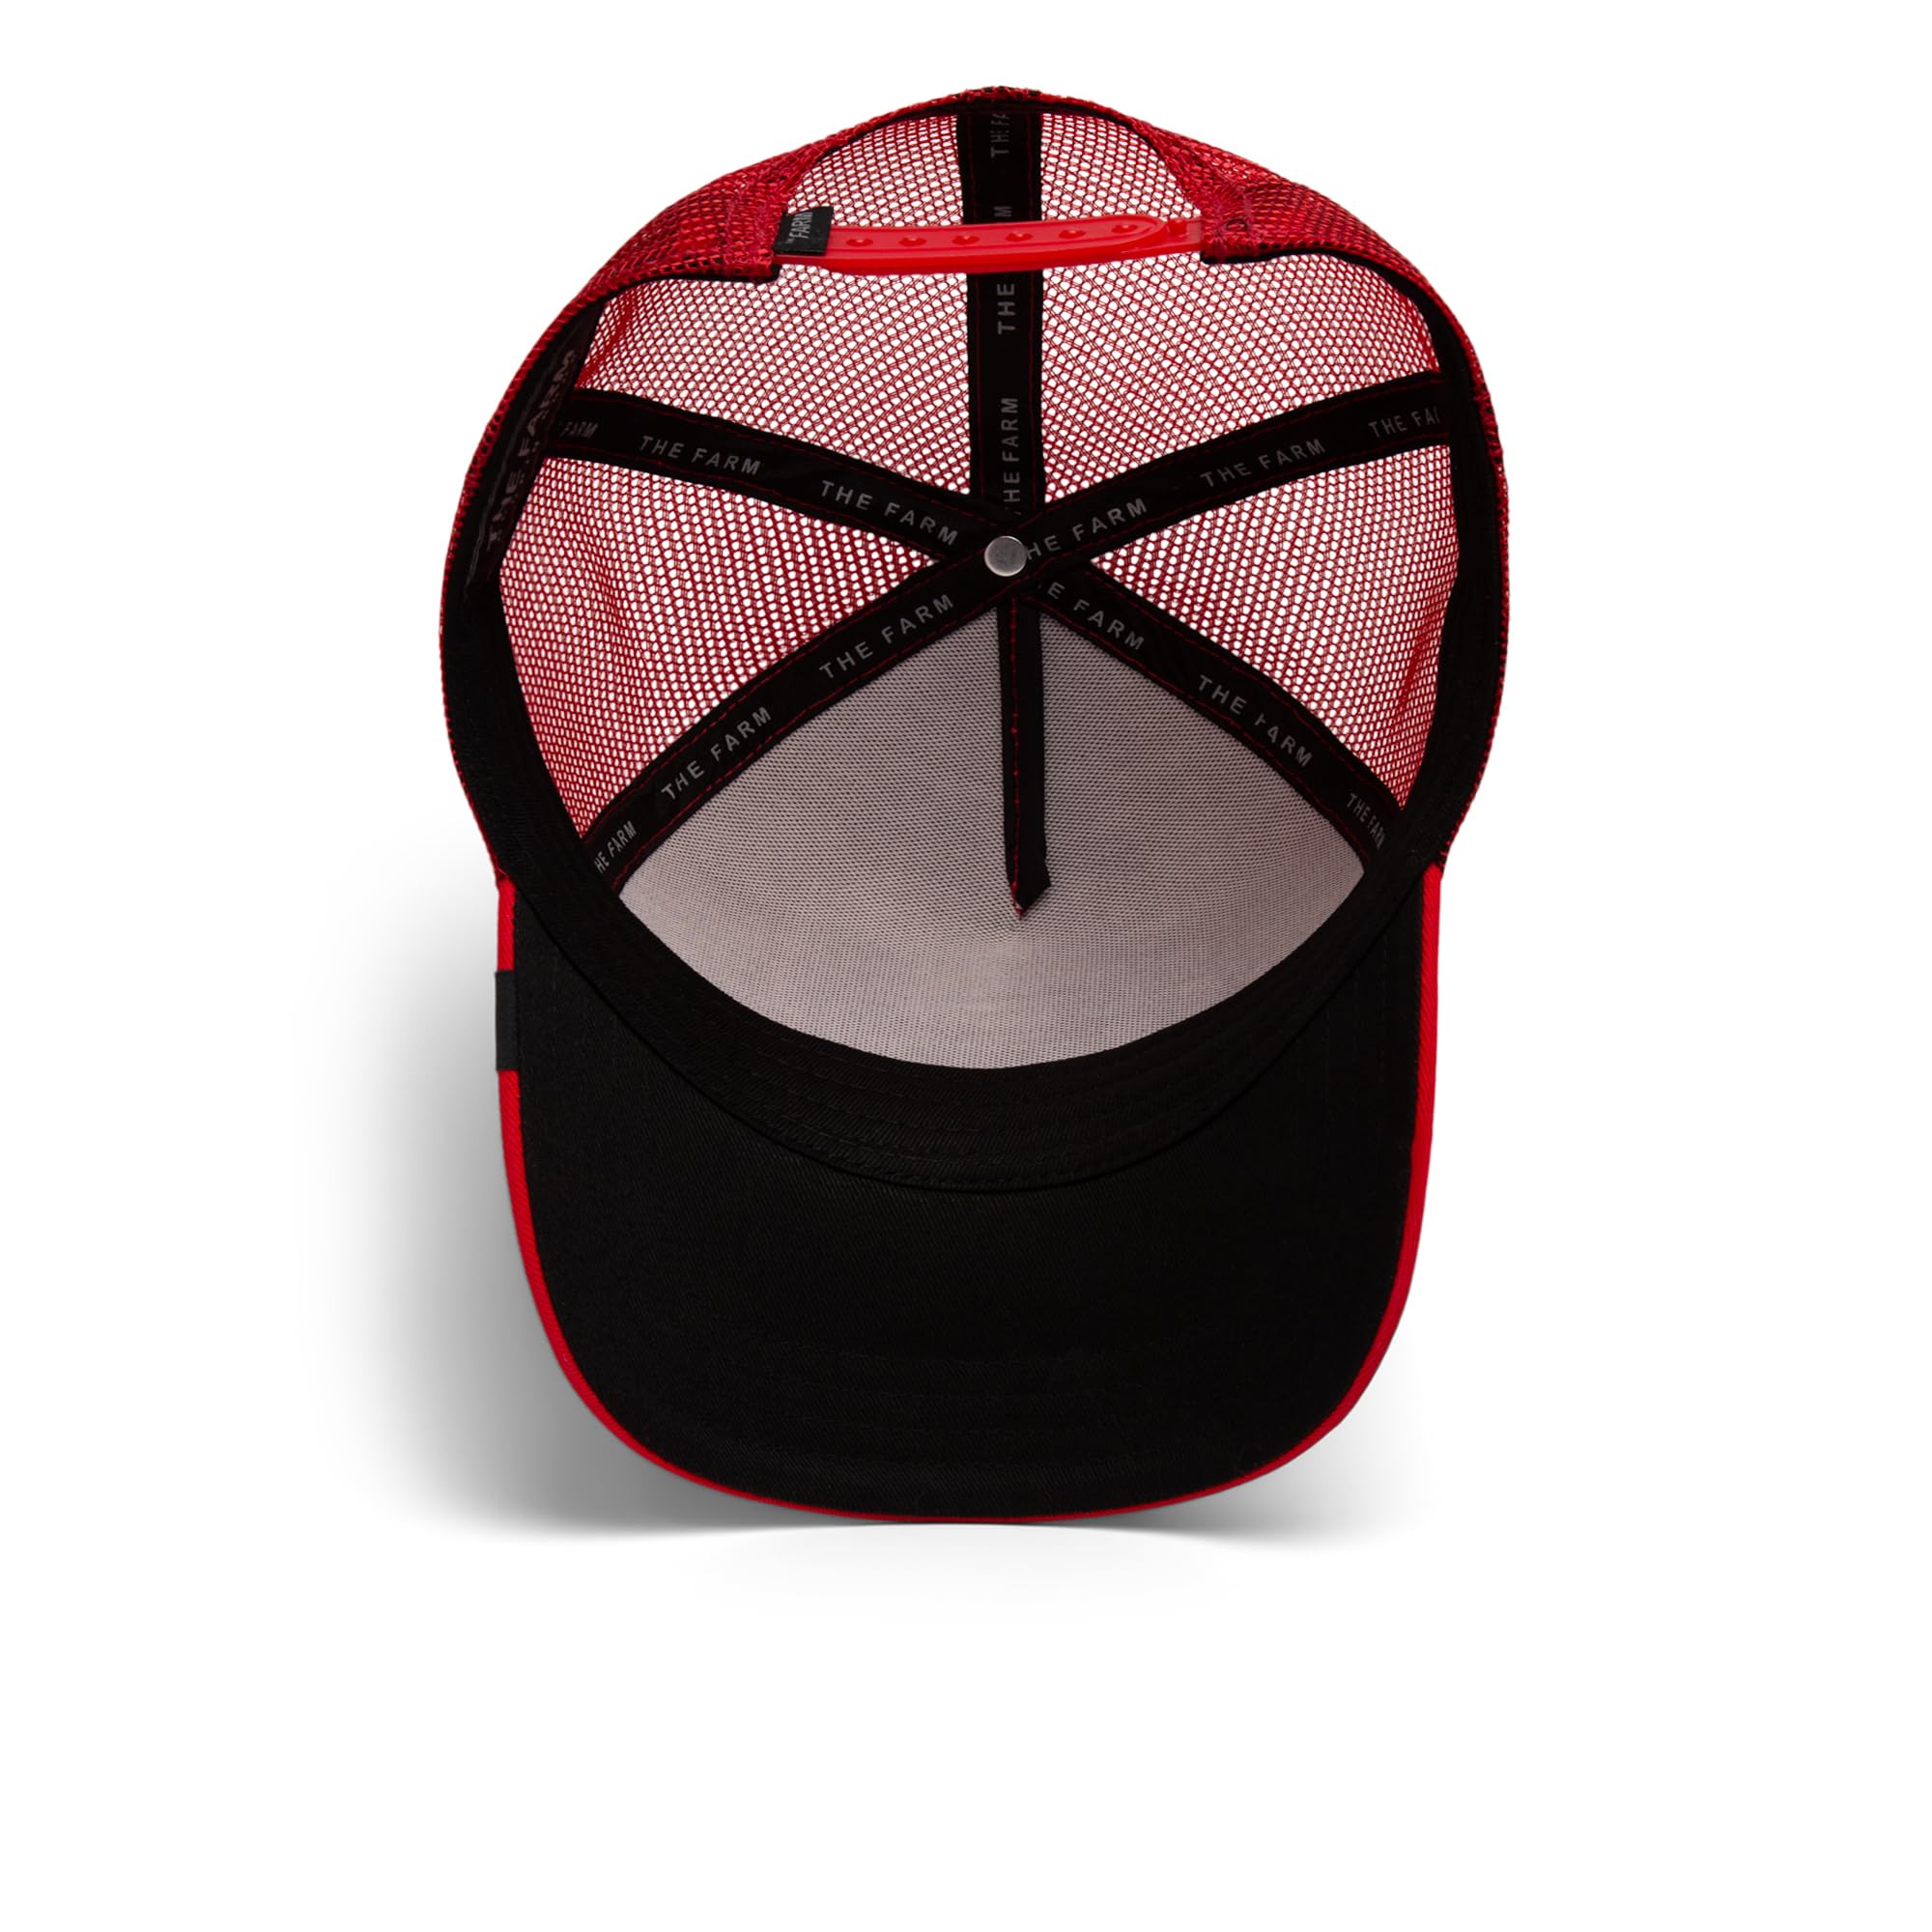 Goorin Bros. The Farm Unisex Original Adjustable Snapback Trucker Hat, Red (The Dragon Beast), One Size - Caps Fitted Caps Fitted Goorin Bros.